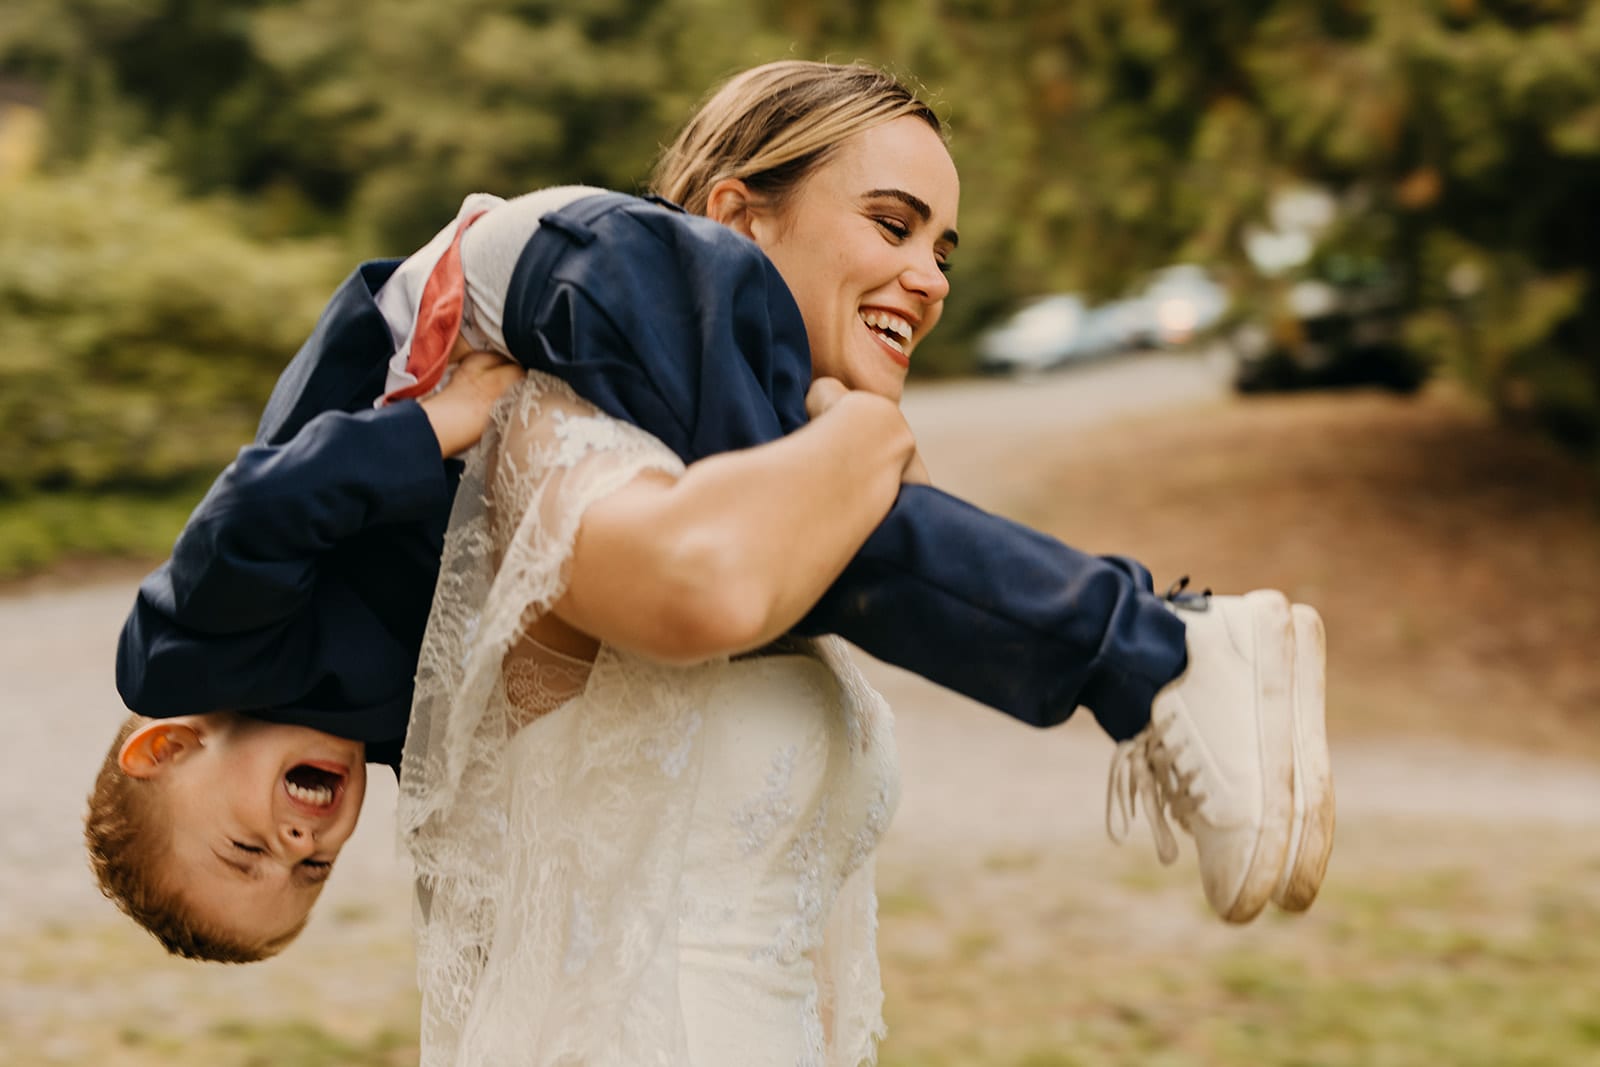 The bride carries her nephew.